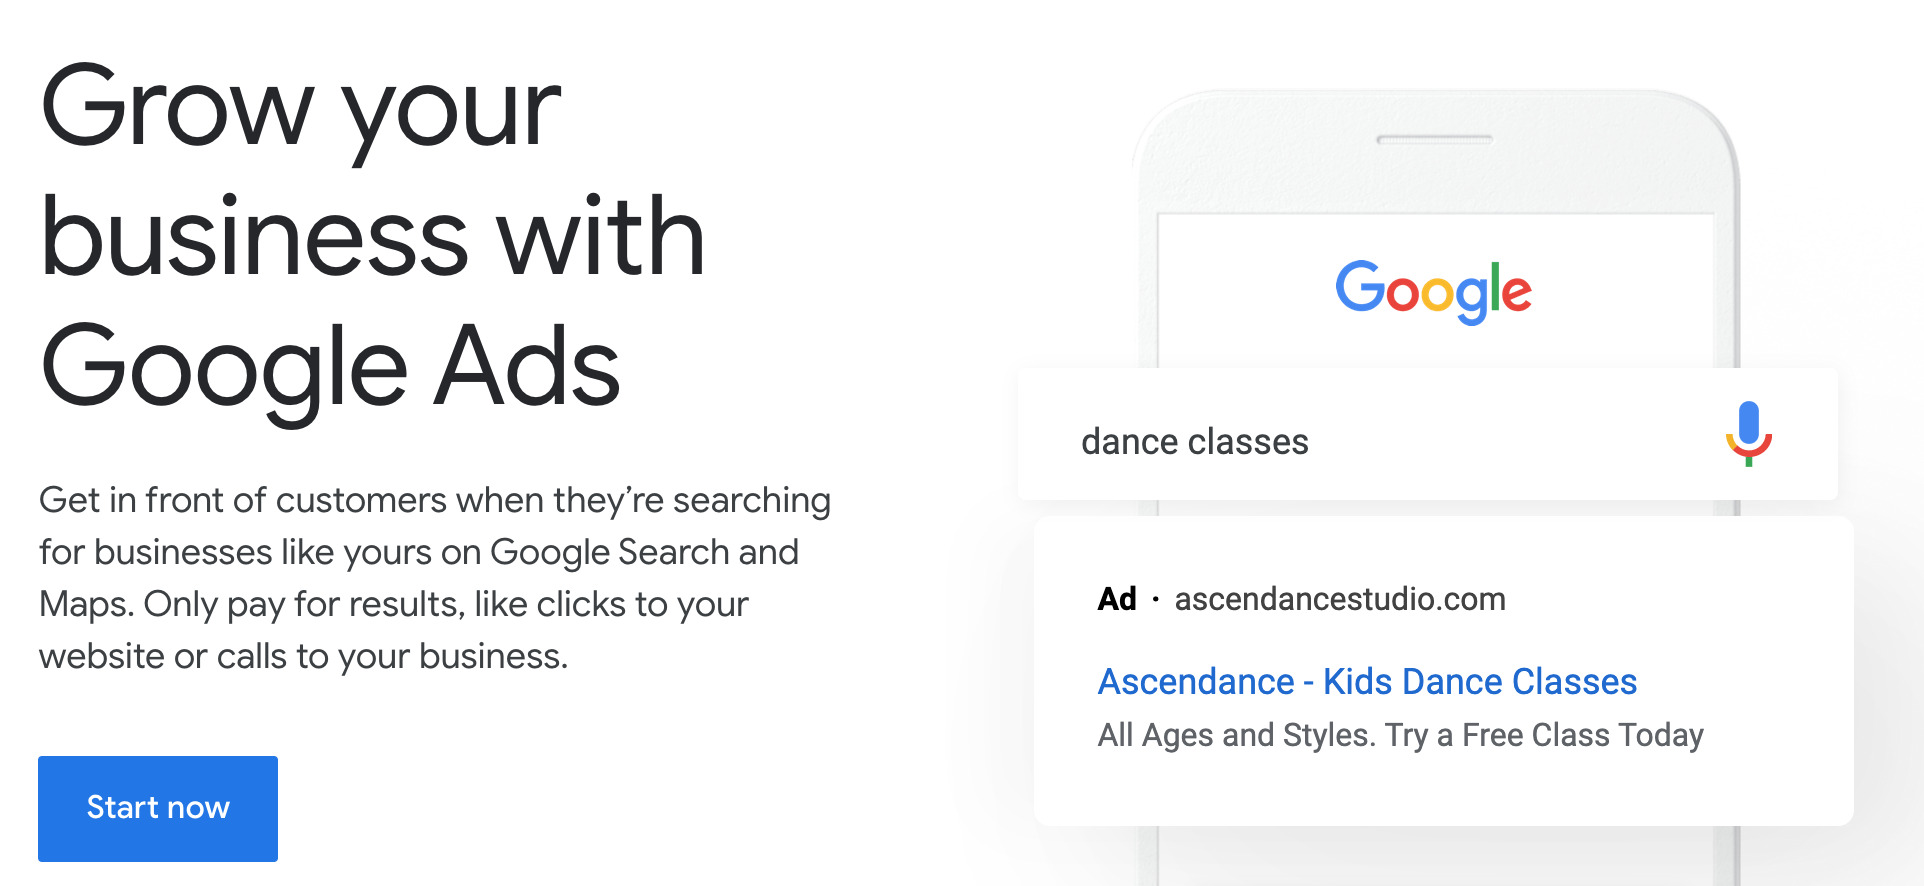 The Google Ads homepage, published to: "Google Ads Pros and Cons for Small Businesses"